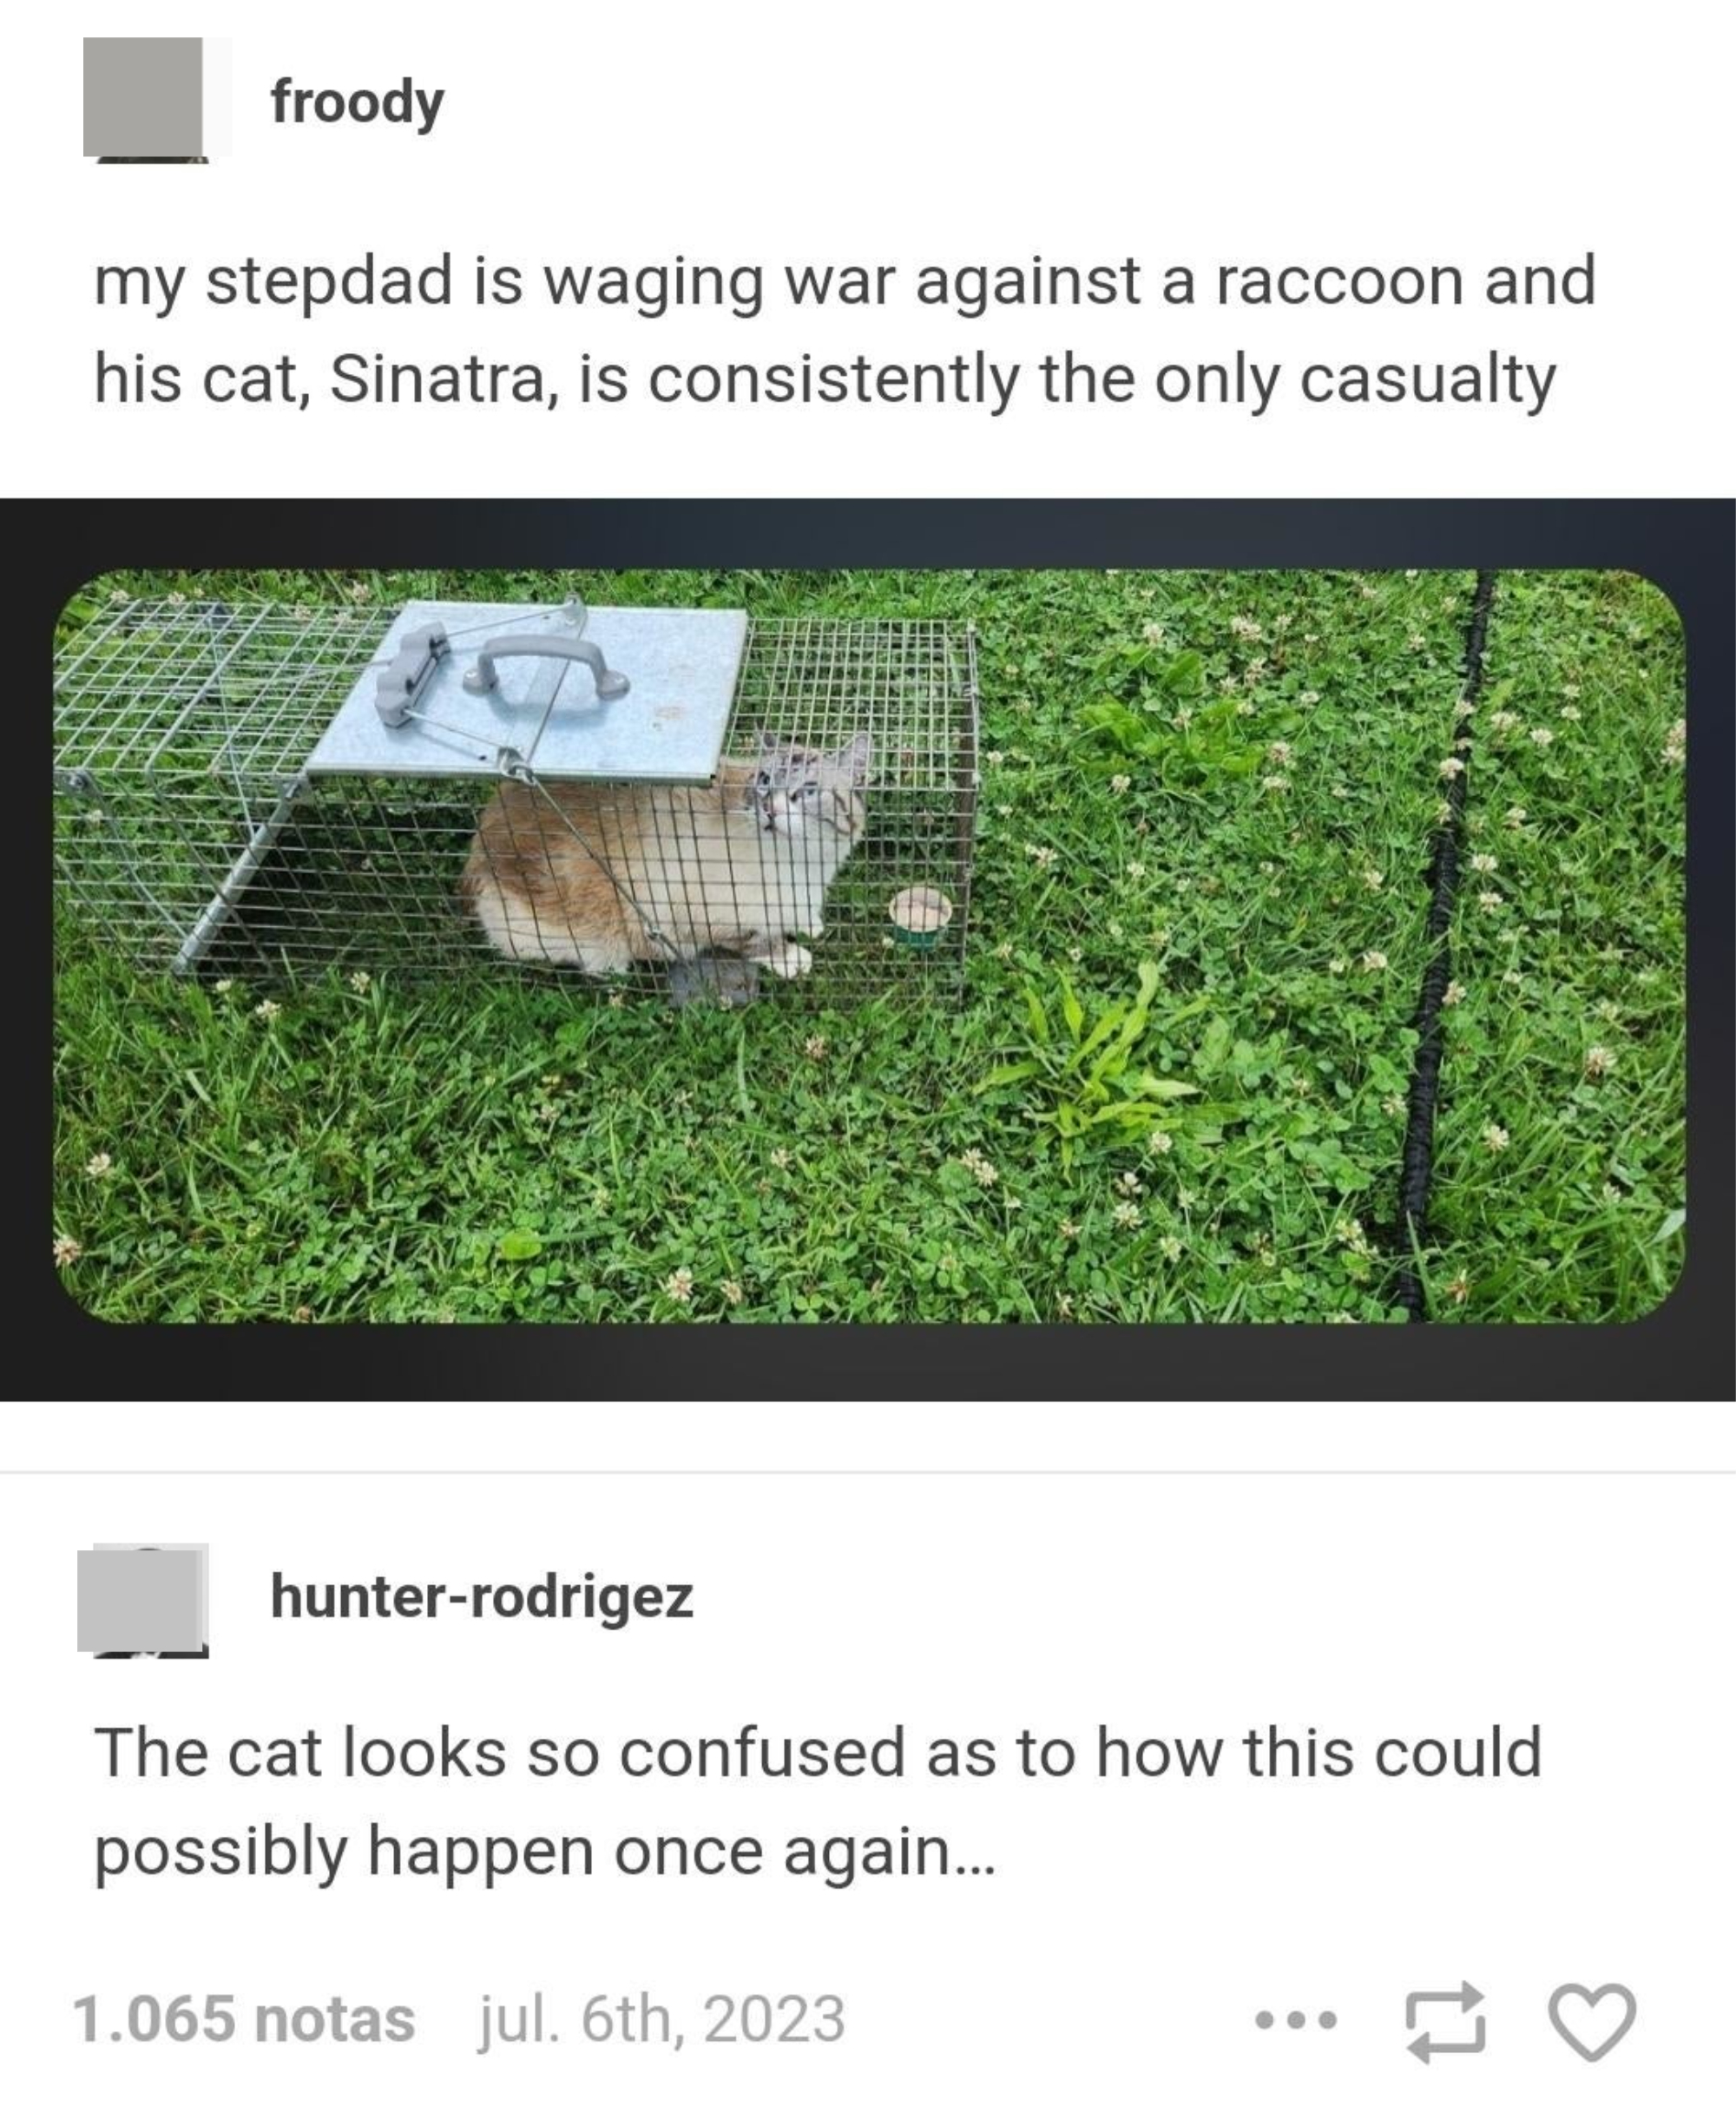 Cat is in a cage trap outdoors, with comment &quot;my stepdad is waging war against a raccoon and his cat Sinatra is consistently the only casualty&quot; response: &quot;The cat looks so confused as to how this could possibly happen once again&quot;